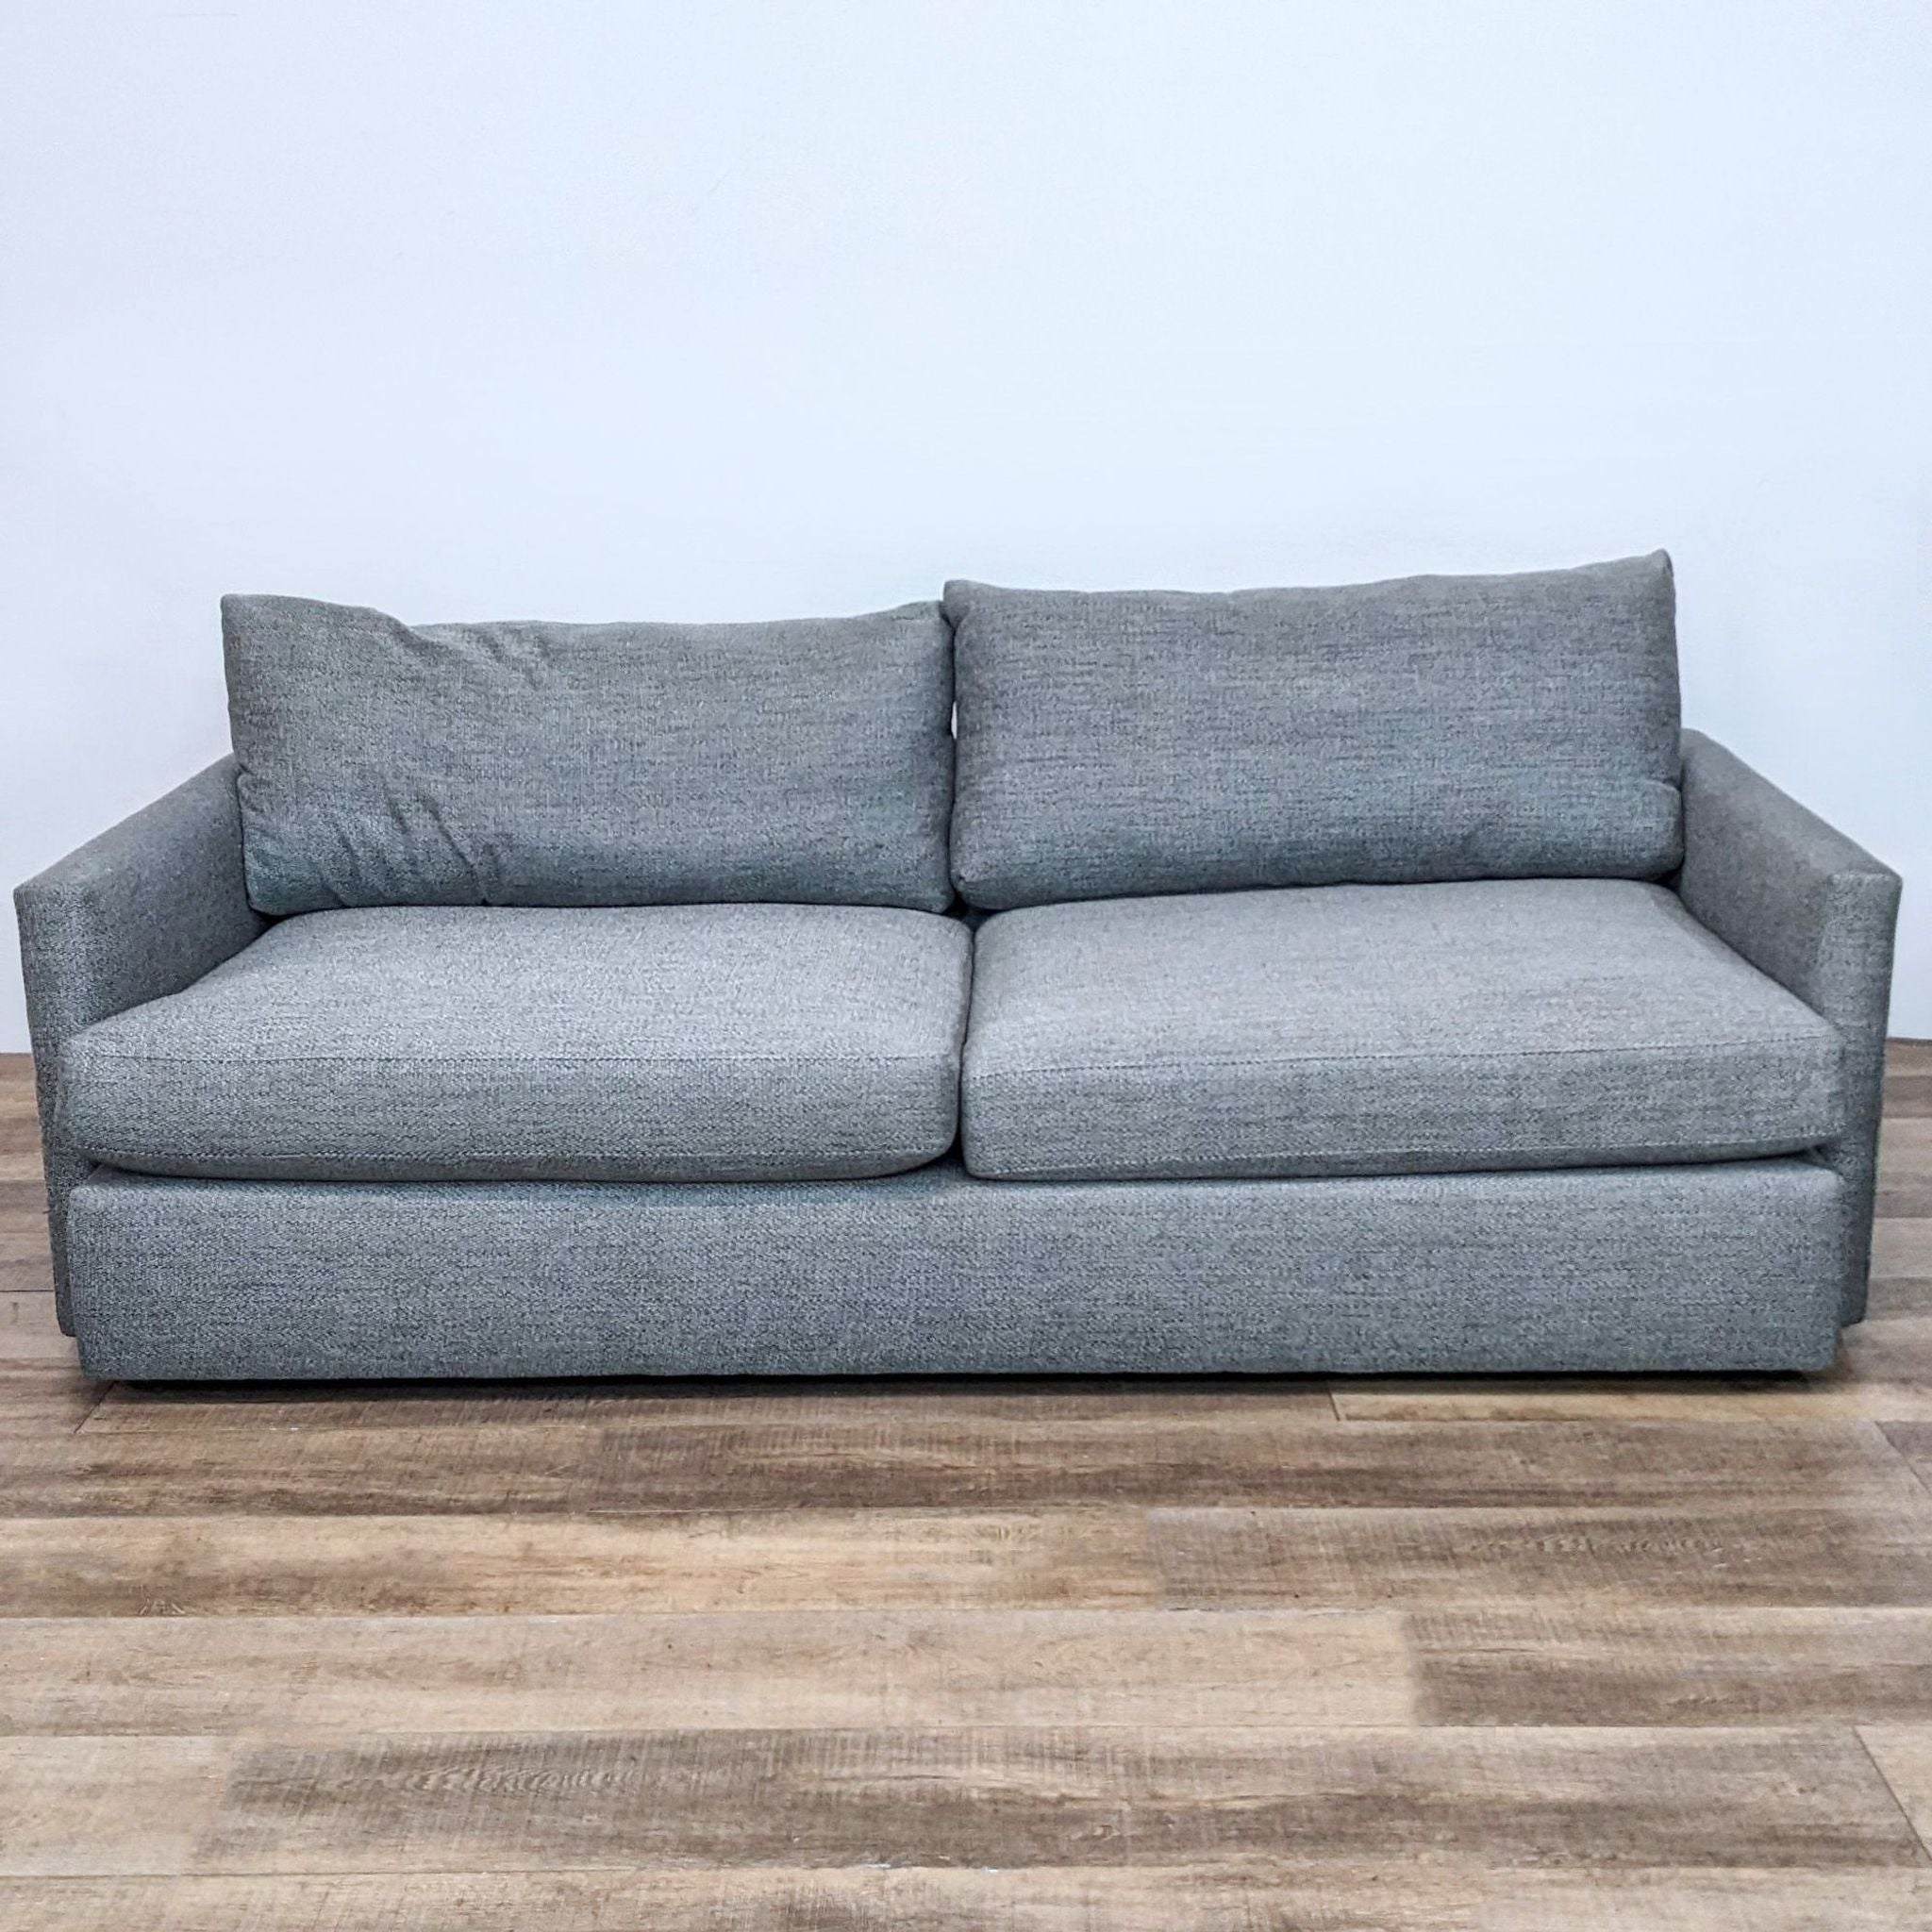 Extra-long modern 3-seat sofa by Crate & Barrel with deep seats and soft back cushions, featuring slim track arms.